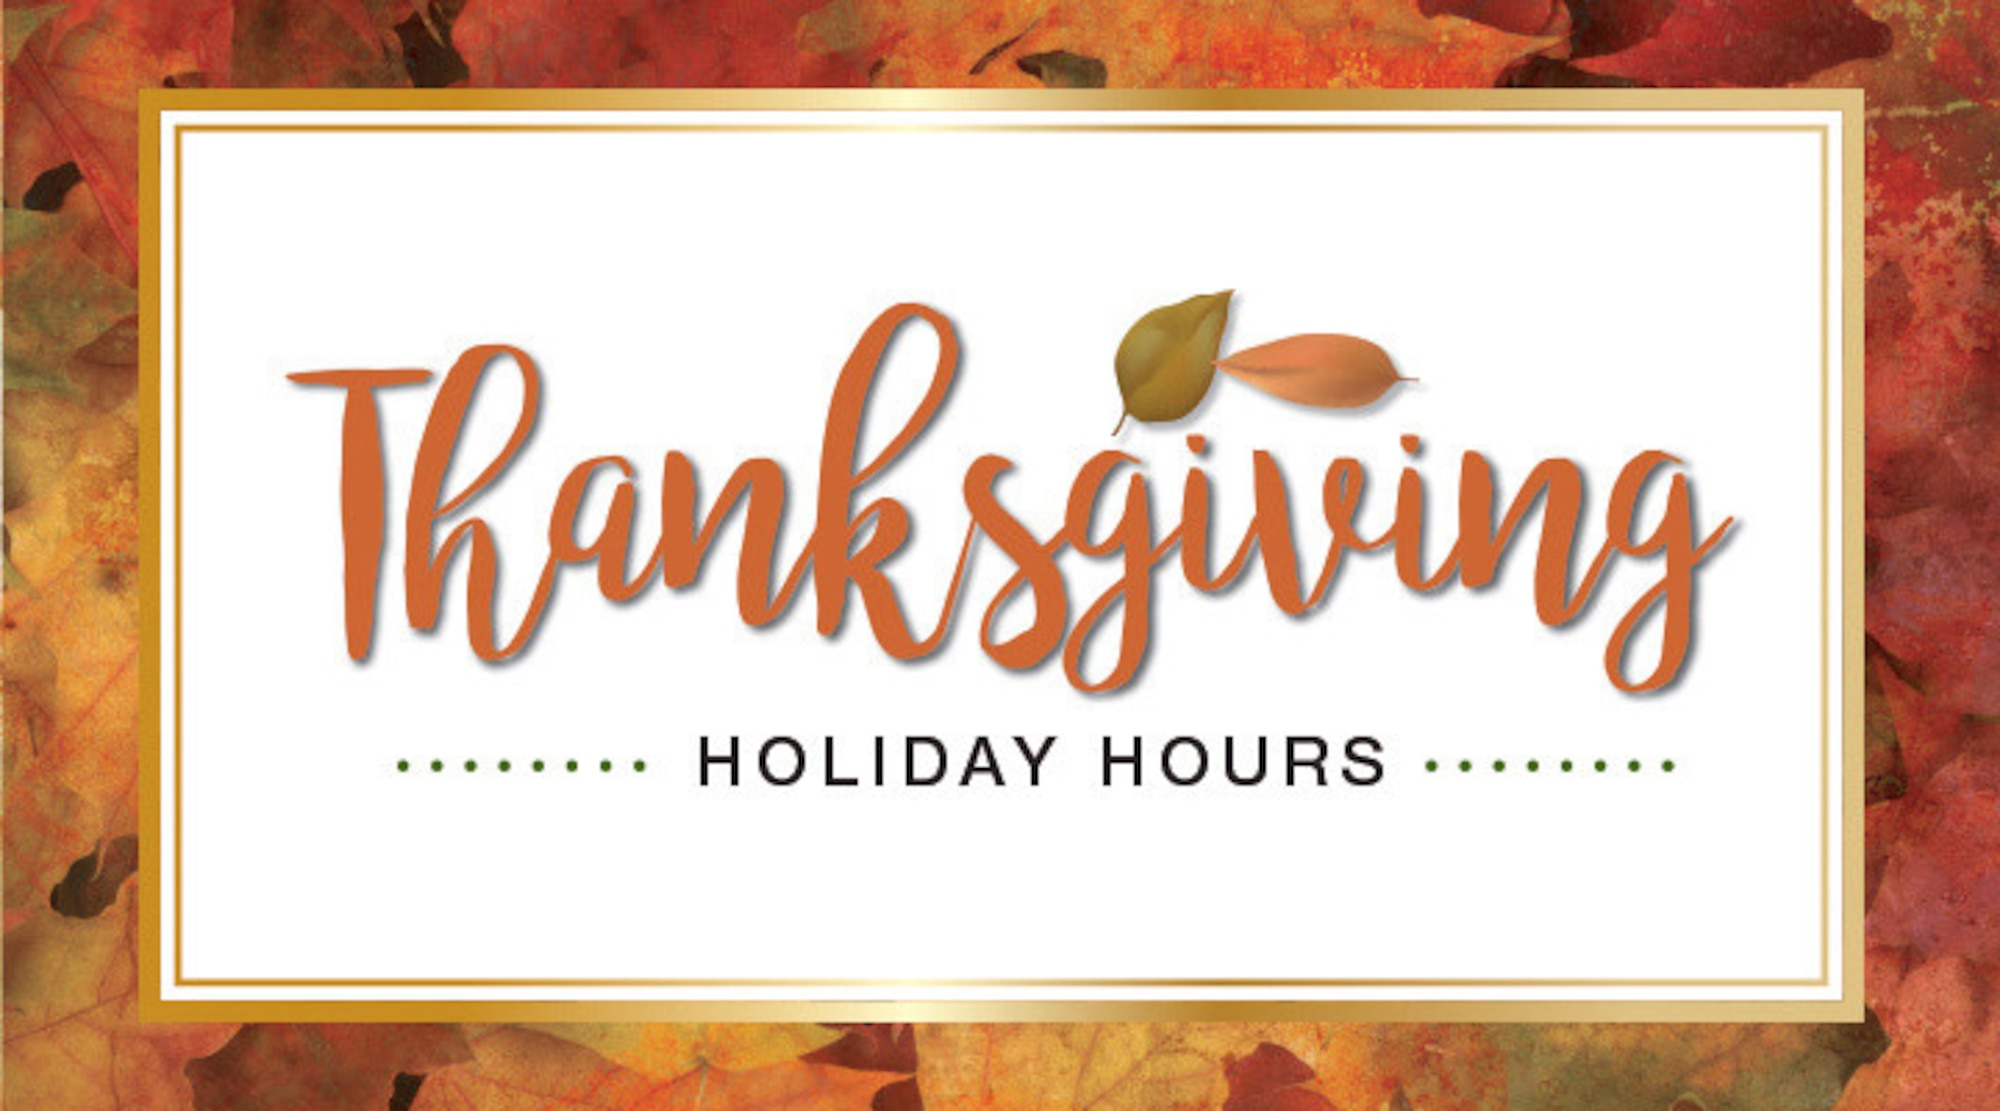 the words Thanksgiving holiday hours